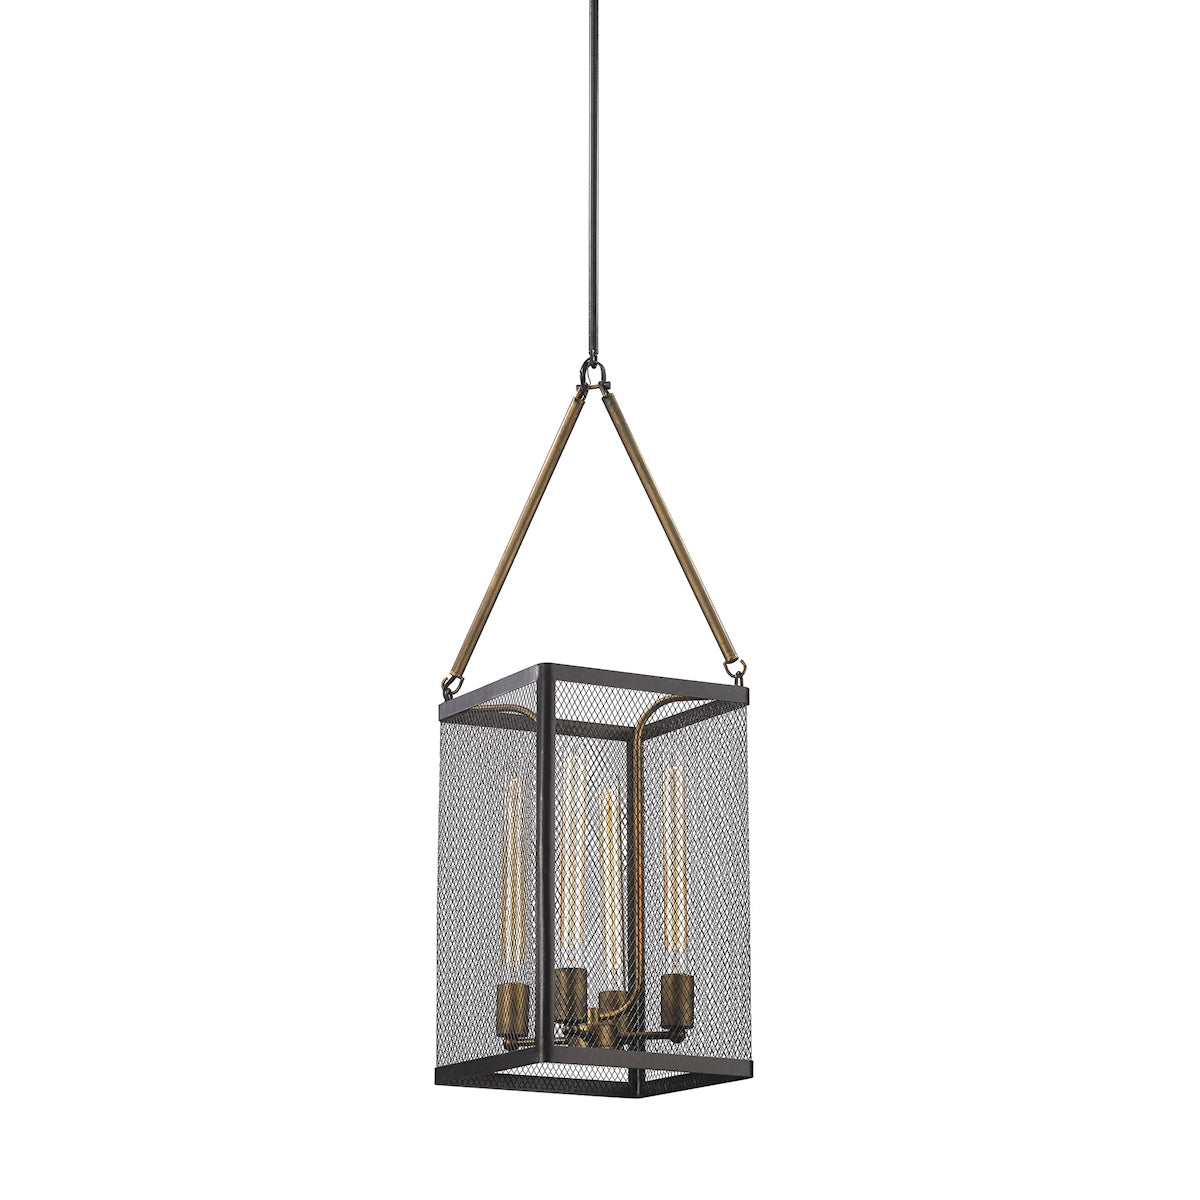 ELK Lighting 14322/4 Donovan 4-Light Chandelier in Antique Gold and Wrought Iron Black with Fishnet Mesh Shade